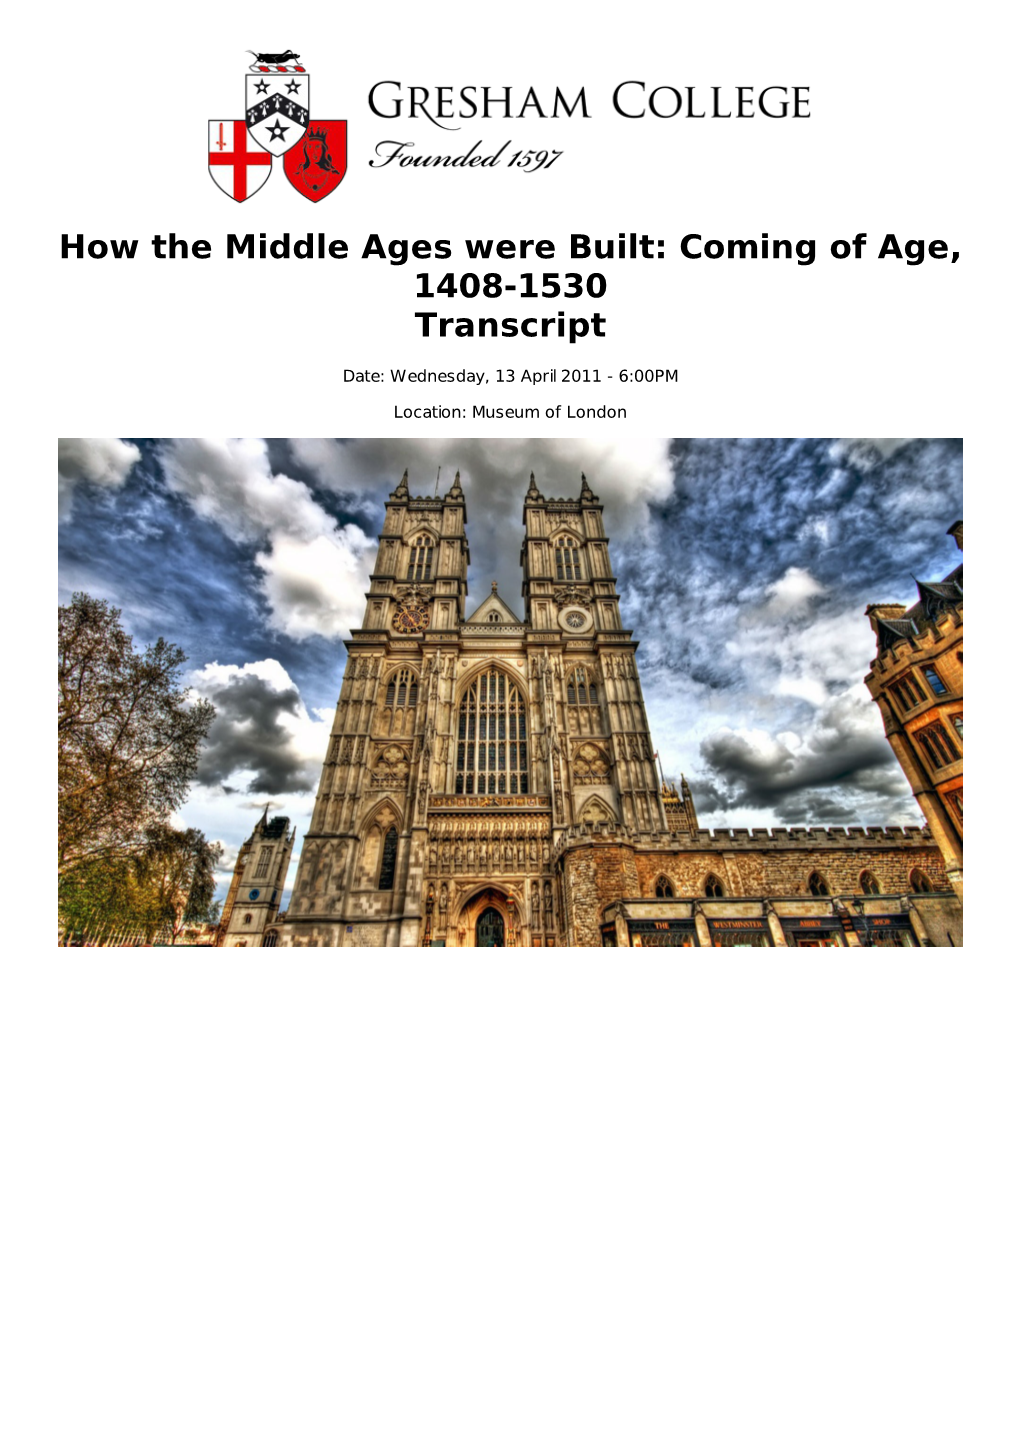 How the Middle Ages Were Built: Coming of Age, 1408-1530 Transcript